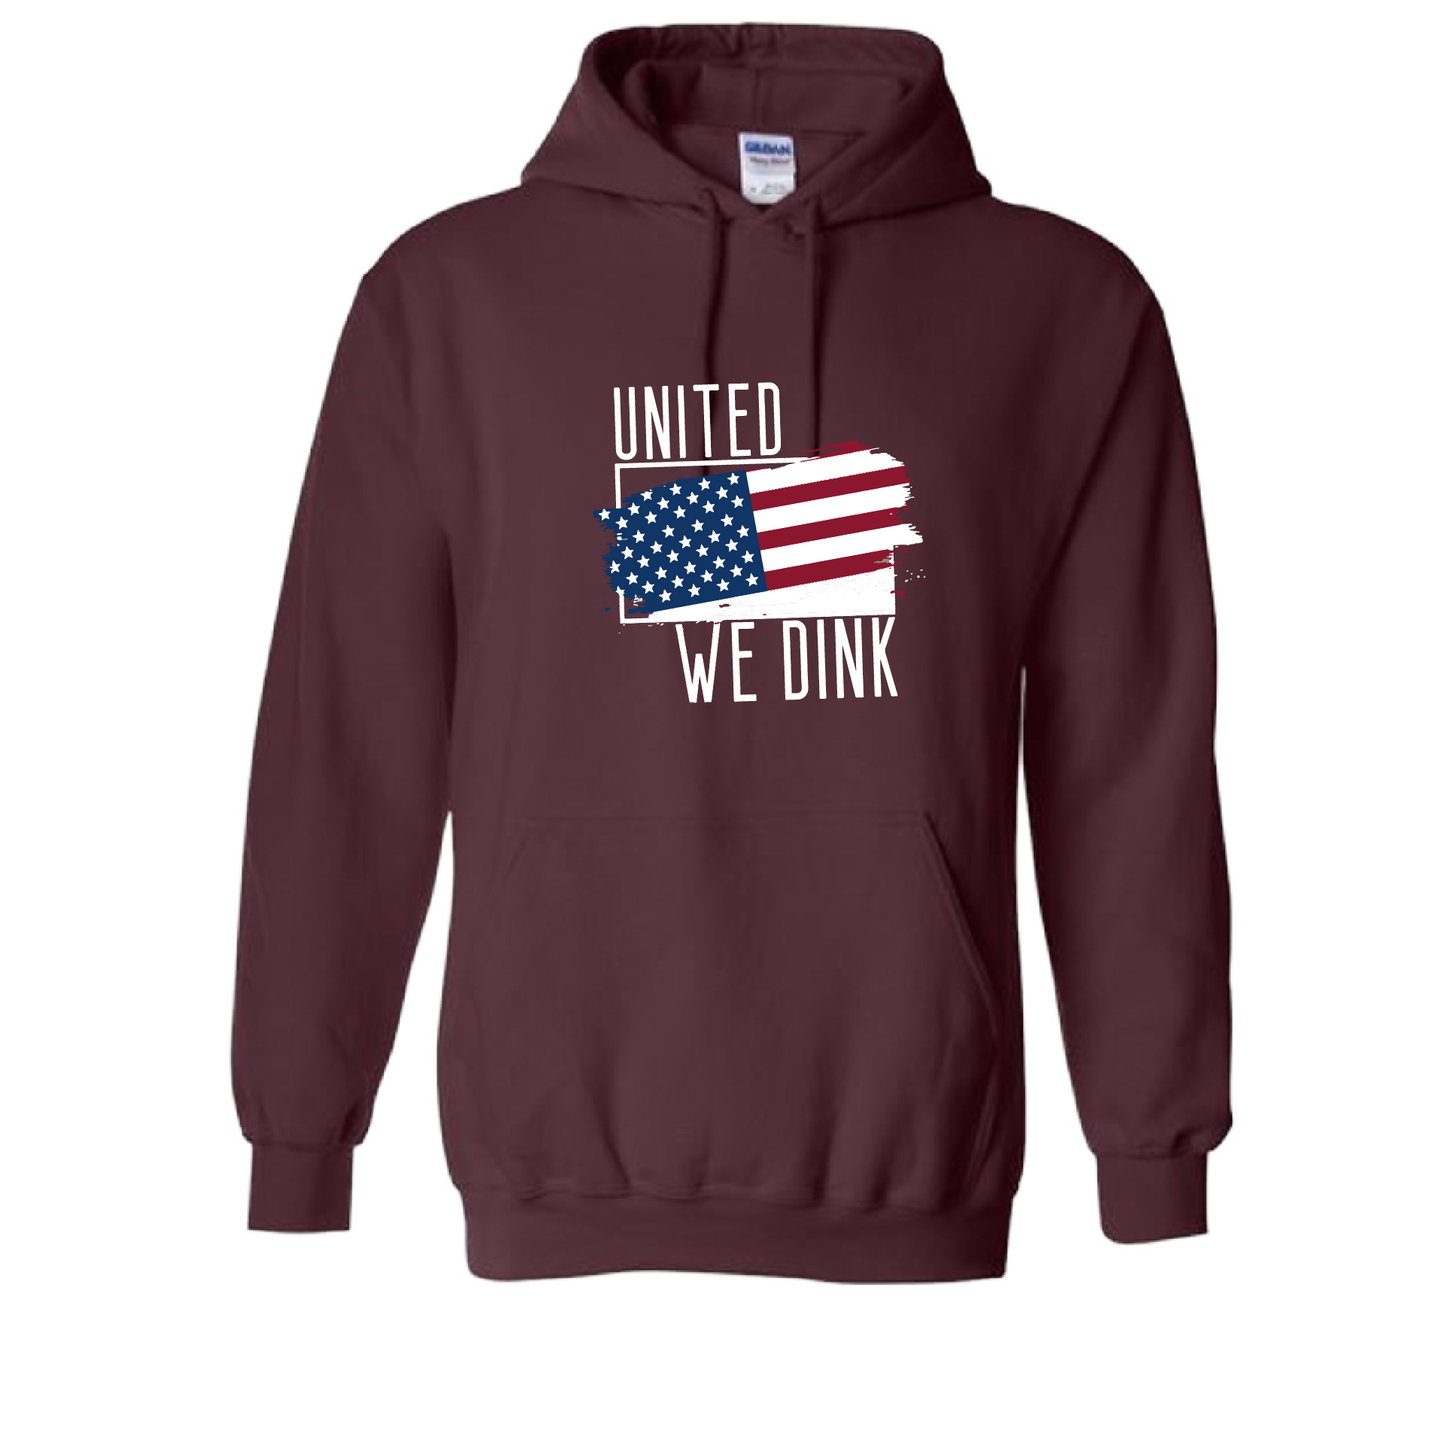 Pickleball Design: United We Dink  Unisex Hooded Sweatshirt: Moisture-wicking, double-lined hood, front pouch pocket.  This unisex hooded sweatshirt is ultra comfortable and soft. Stay warm on the Pickleball courts while being that hit with this one of kind design.